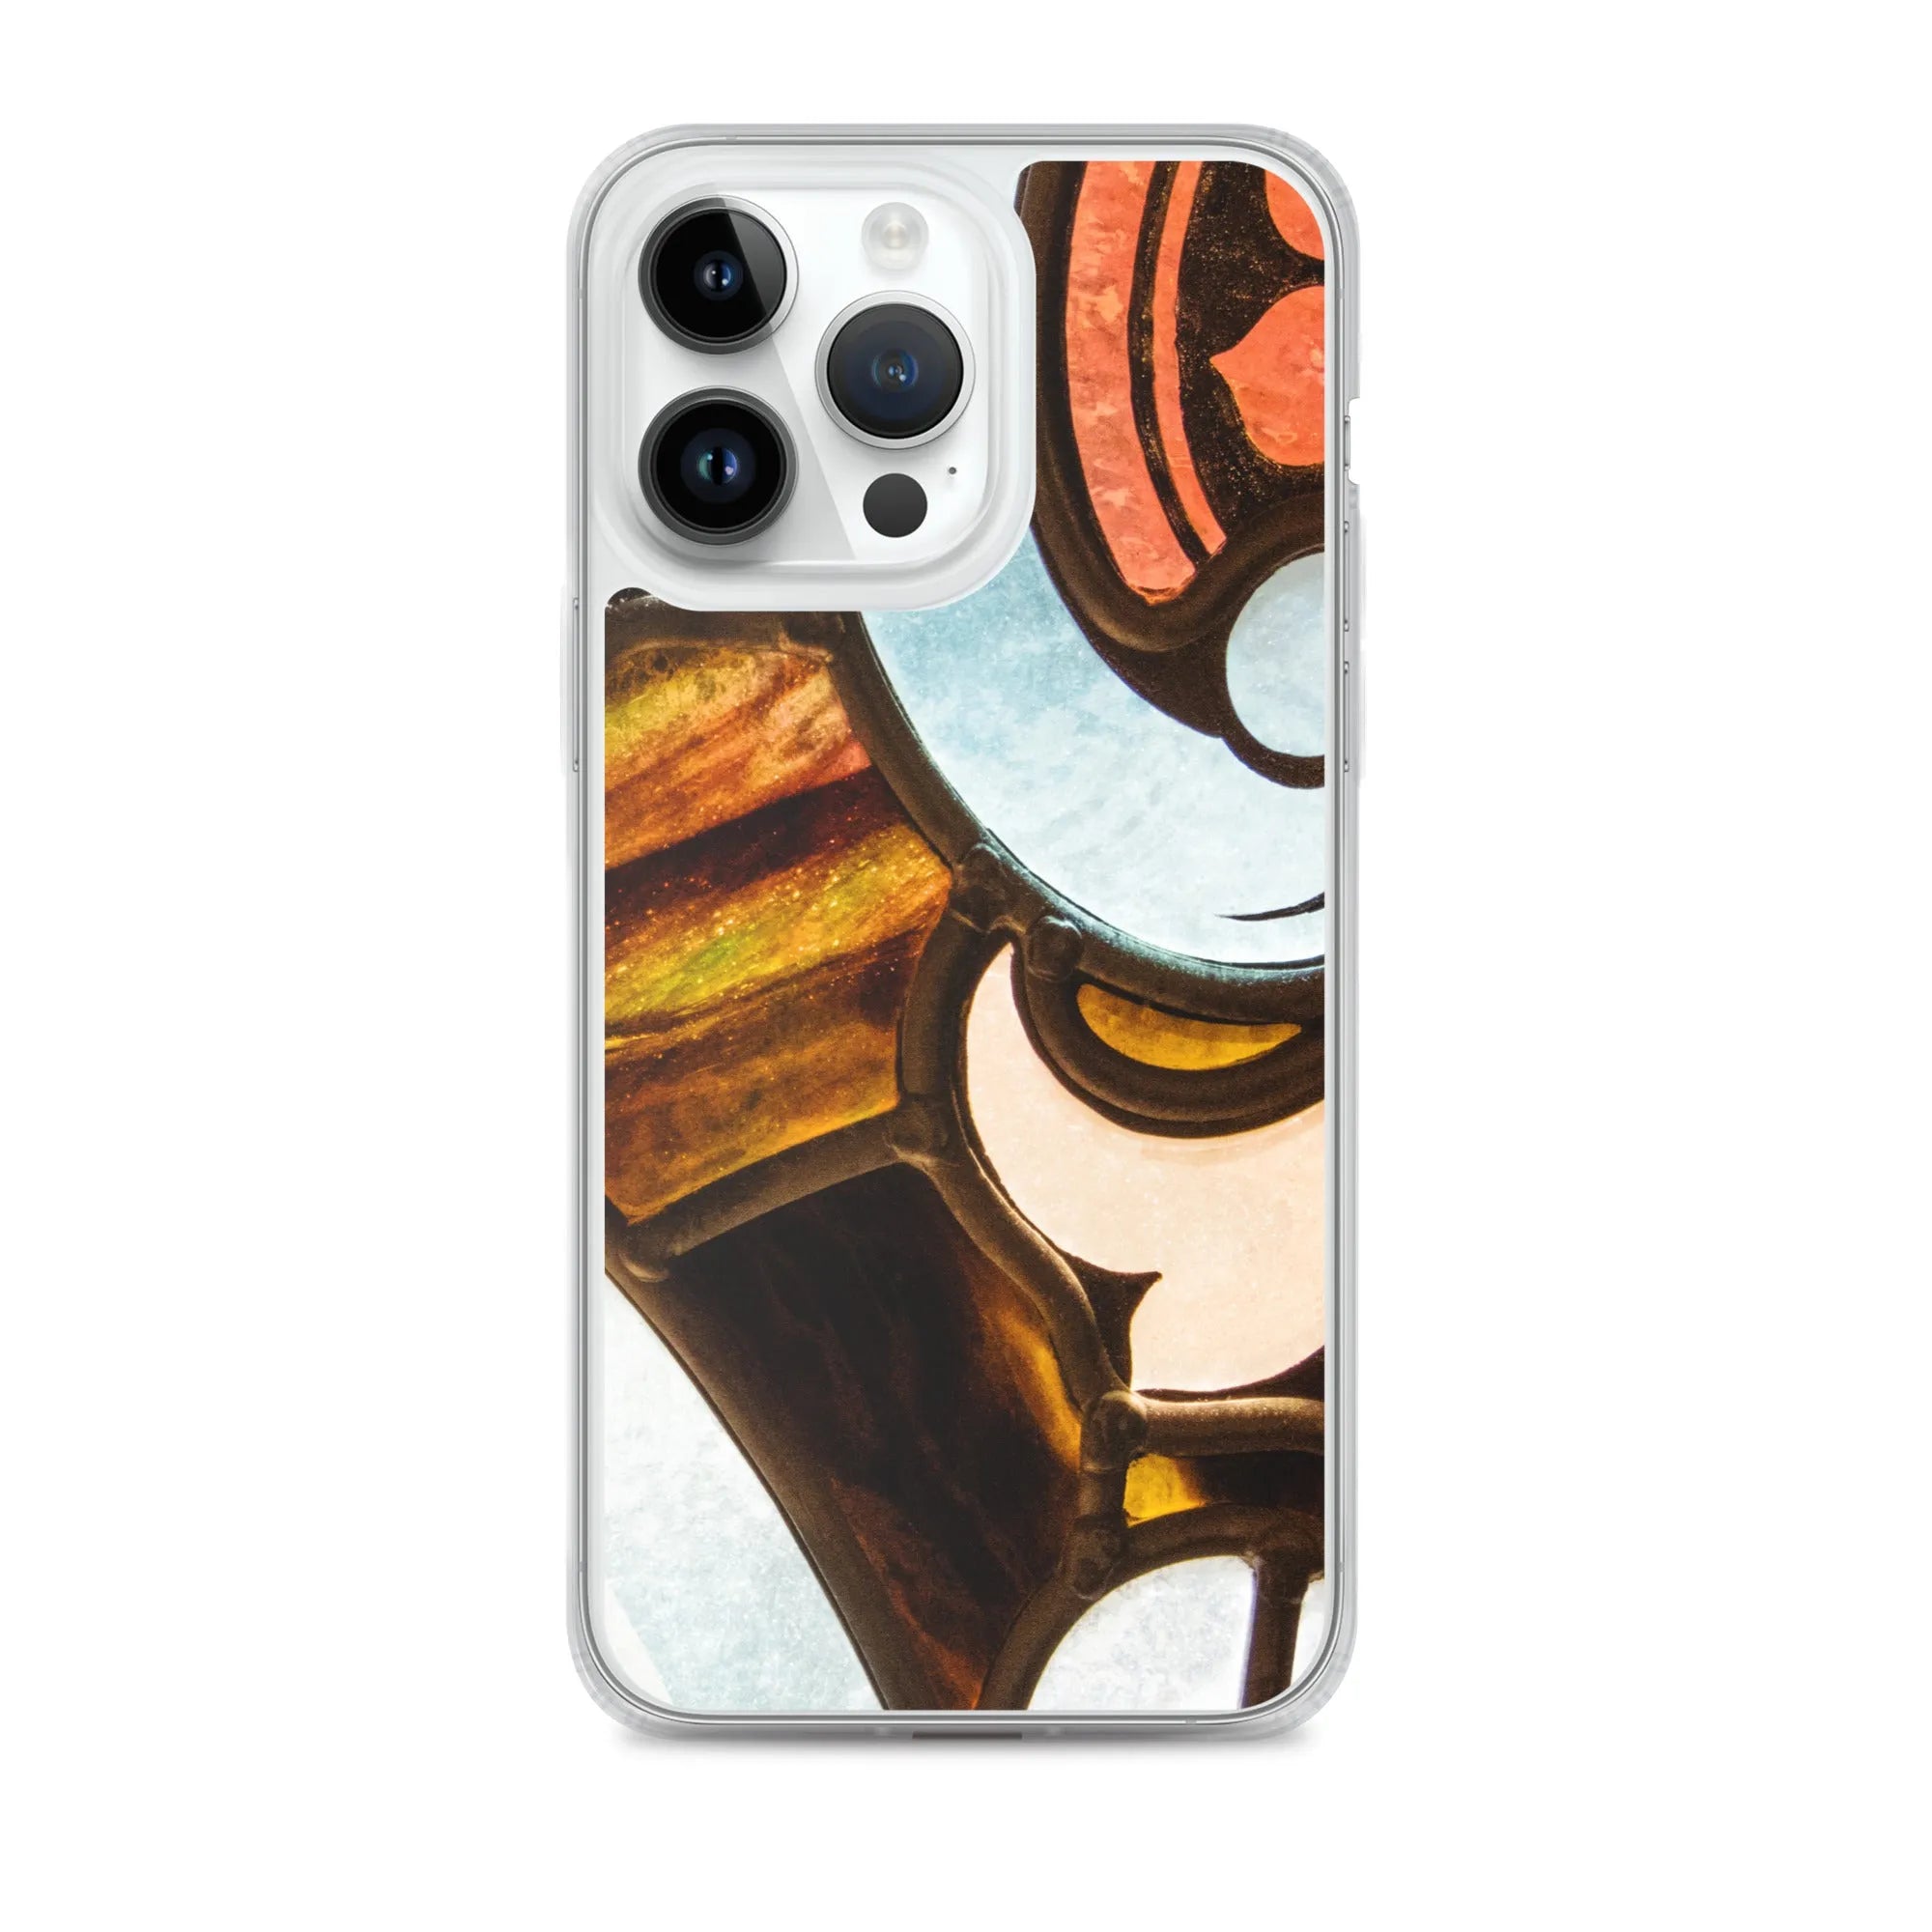 Stay Glassy - Designer Travels Art Iphone Case - Iphone 14 Pro Max - Mobile Phone Cases - Aesthetic Art